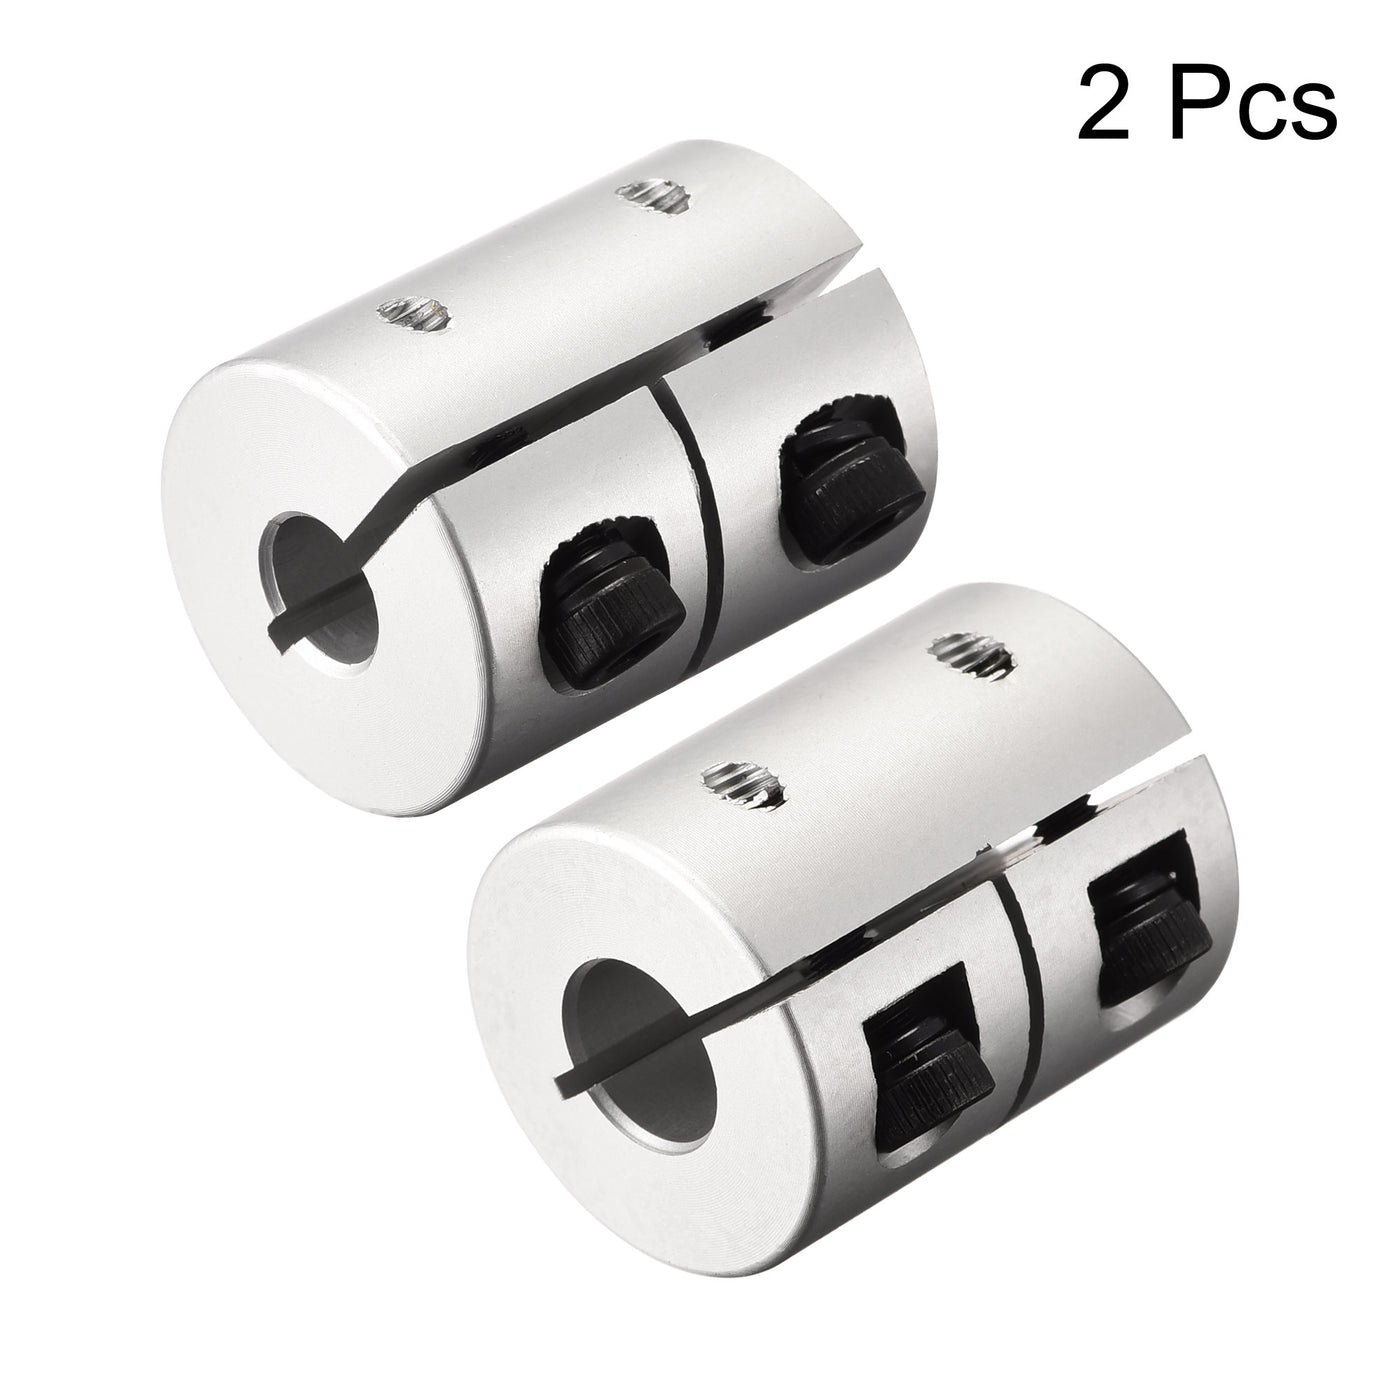 Uxcell Uxcell 2pcs 6mm to 6mm Shaft Coupling 25mmx20mm Coupler Aluminum Alloy Joint Motor for 3D Printer CNC Machine DIY Encoder